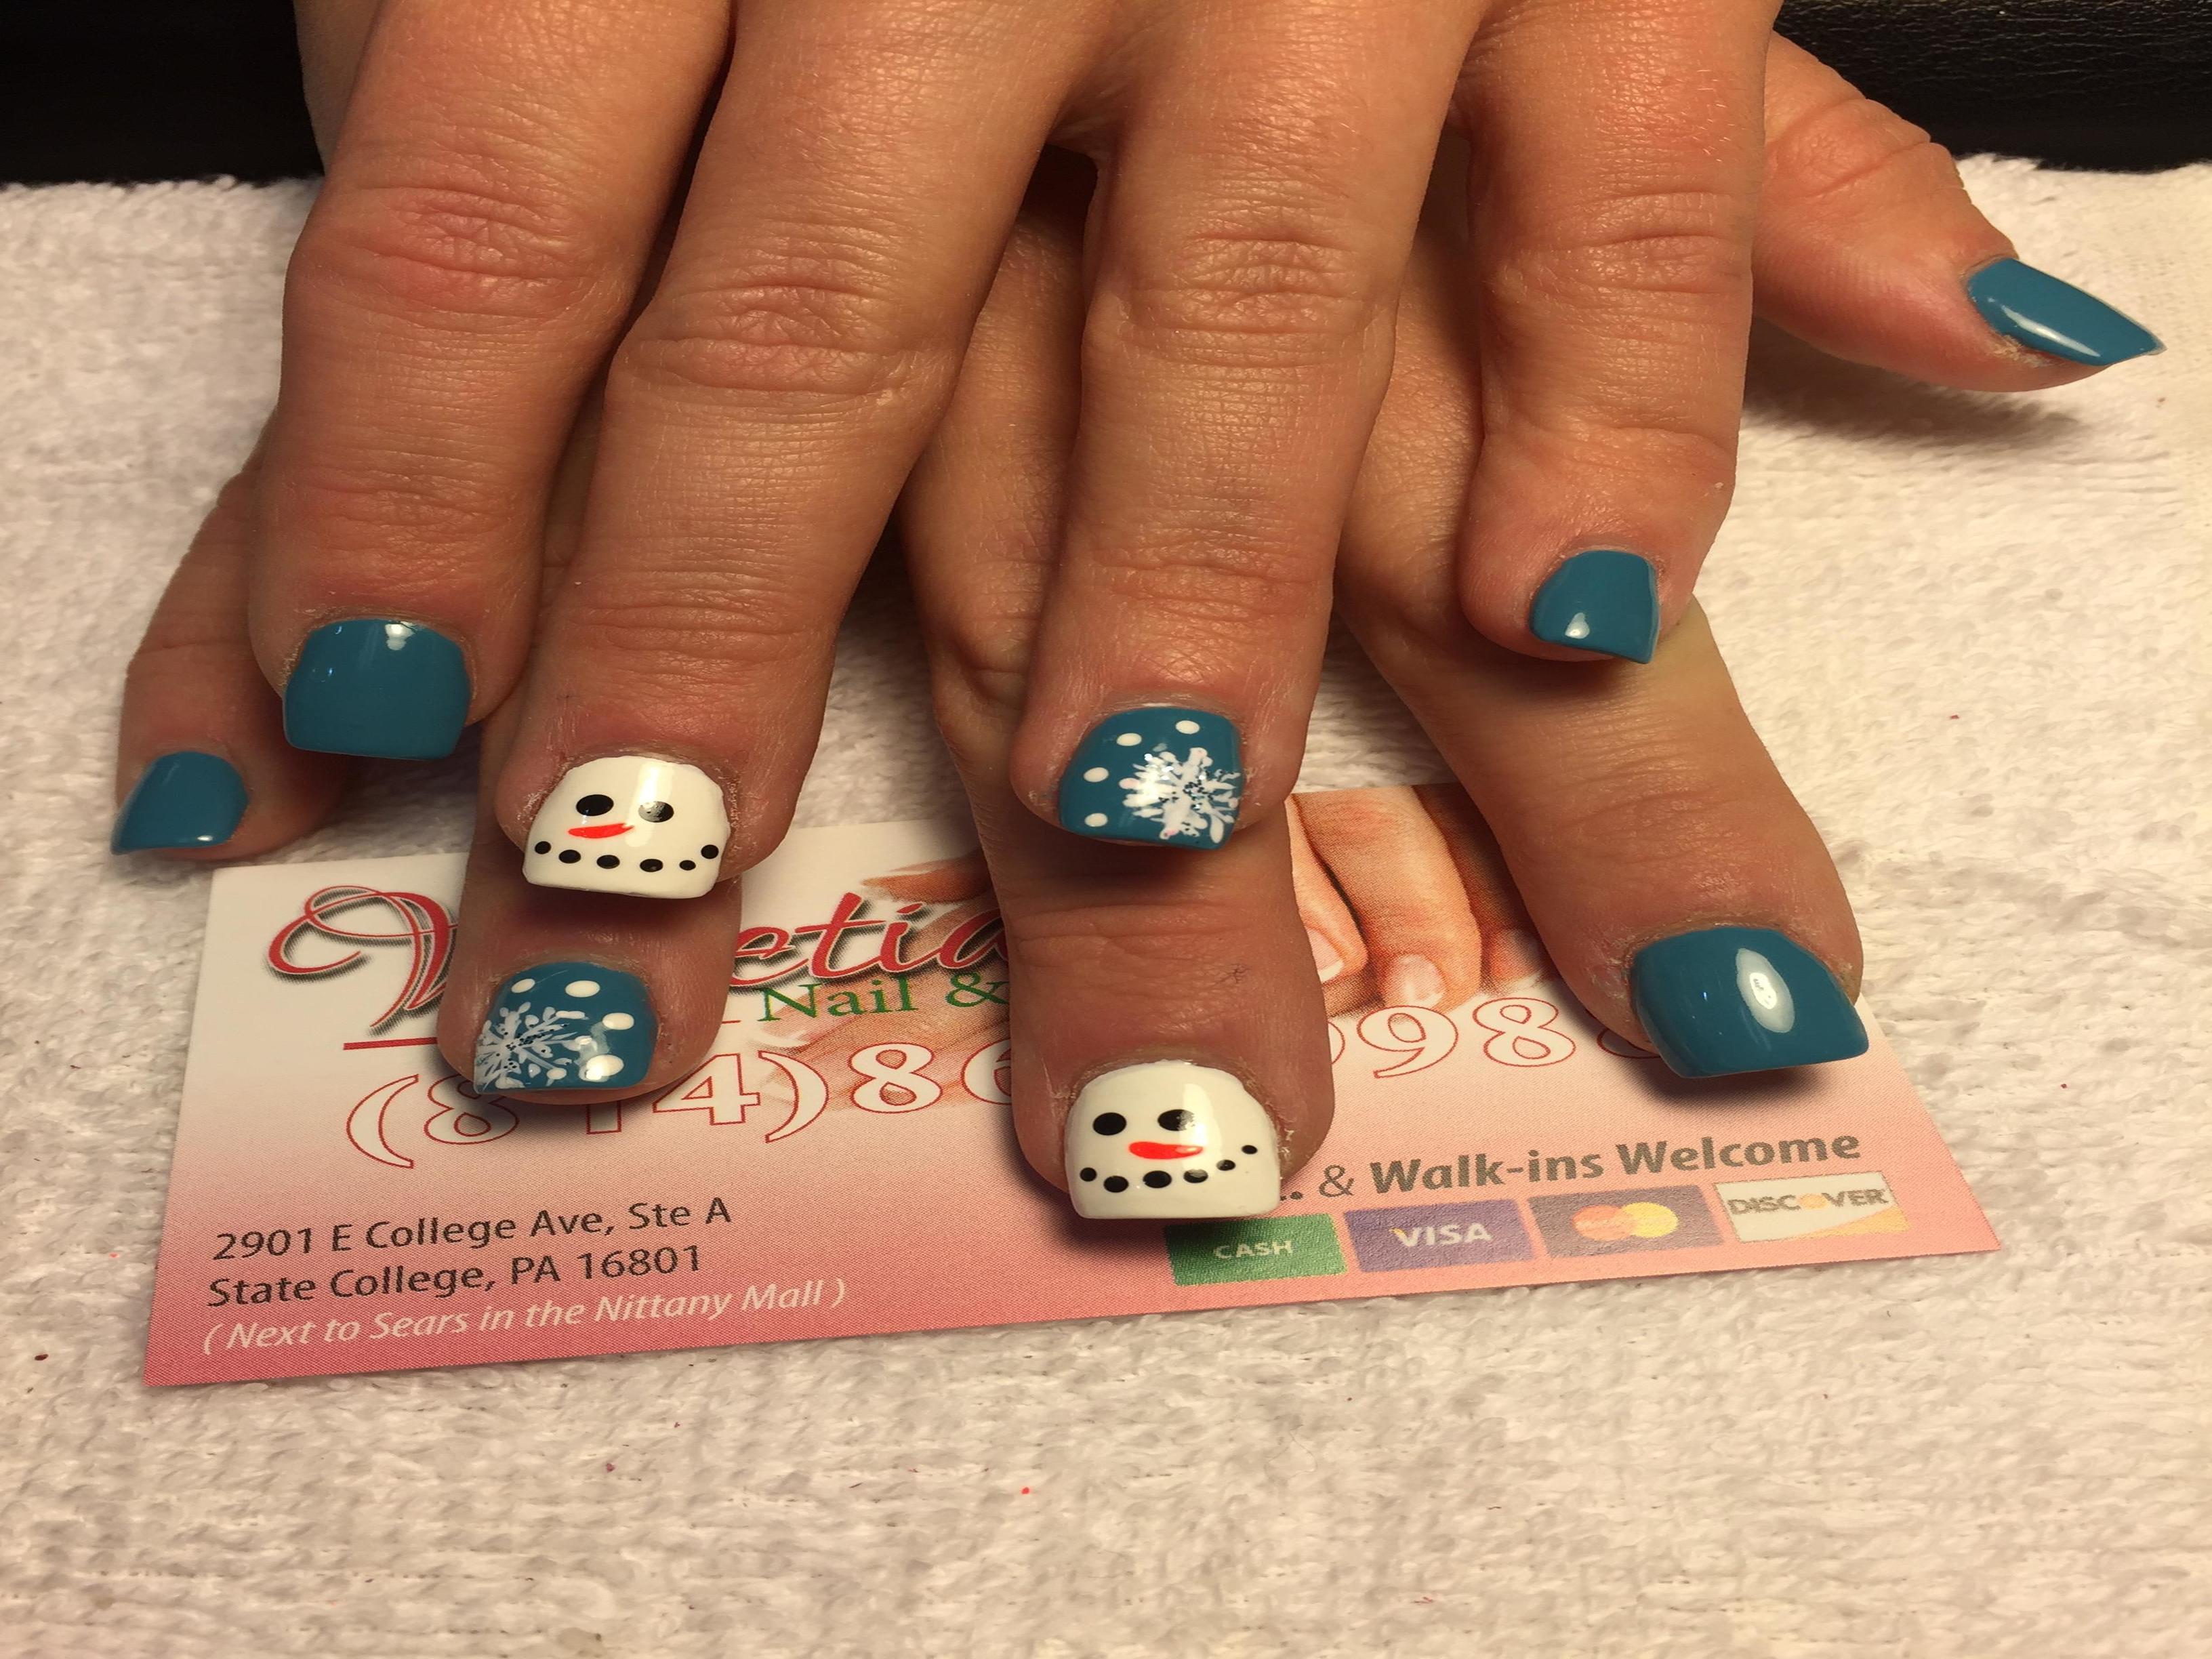 Venetian Nails & Spa Coupons near me in State College | 8coupons